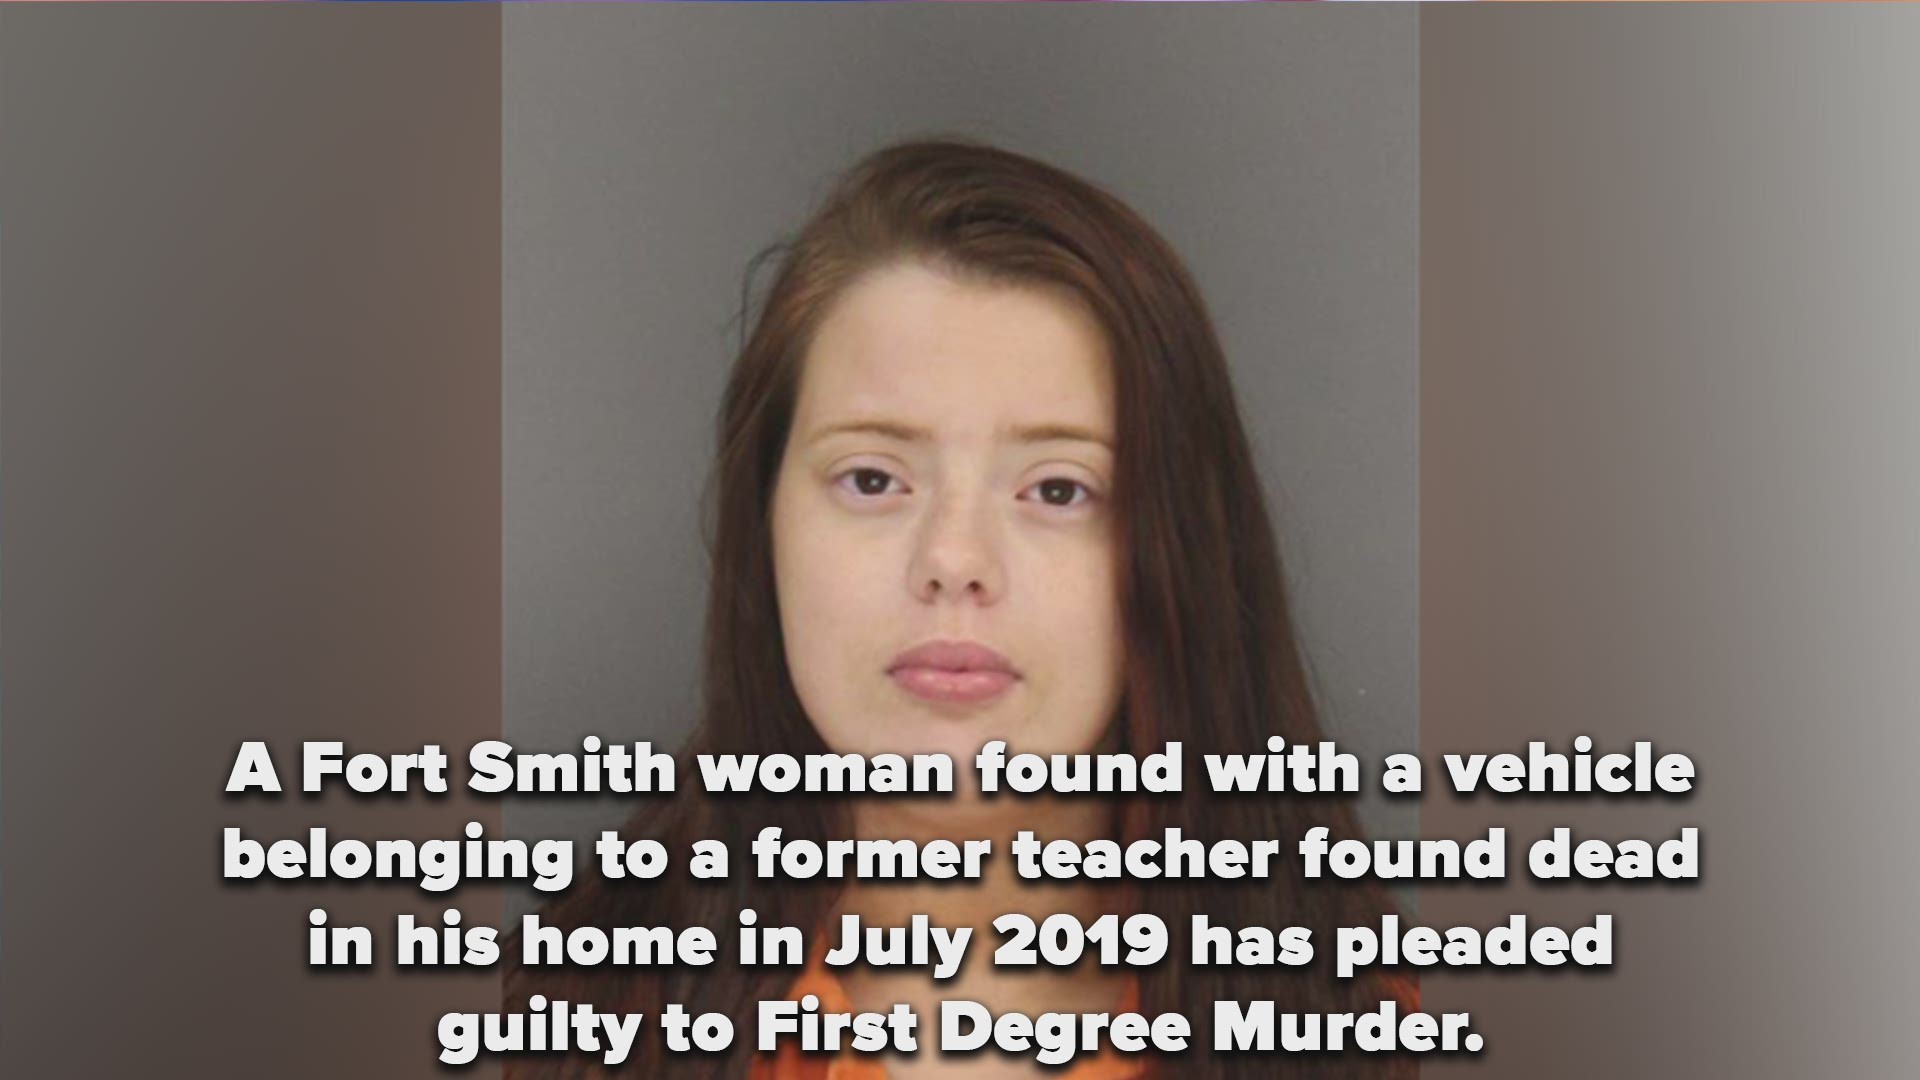 A teacher was found dead in his home in October 2019. In January 2020, Taylor Elkins pleaded guilty to his murder.